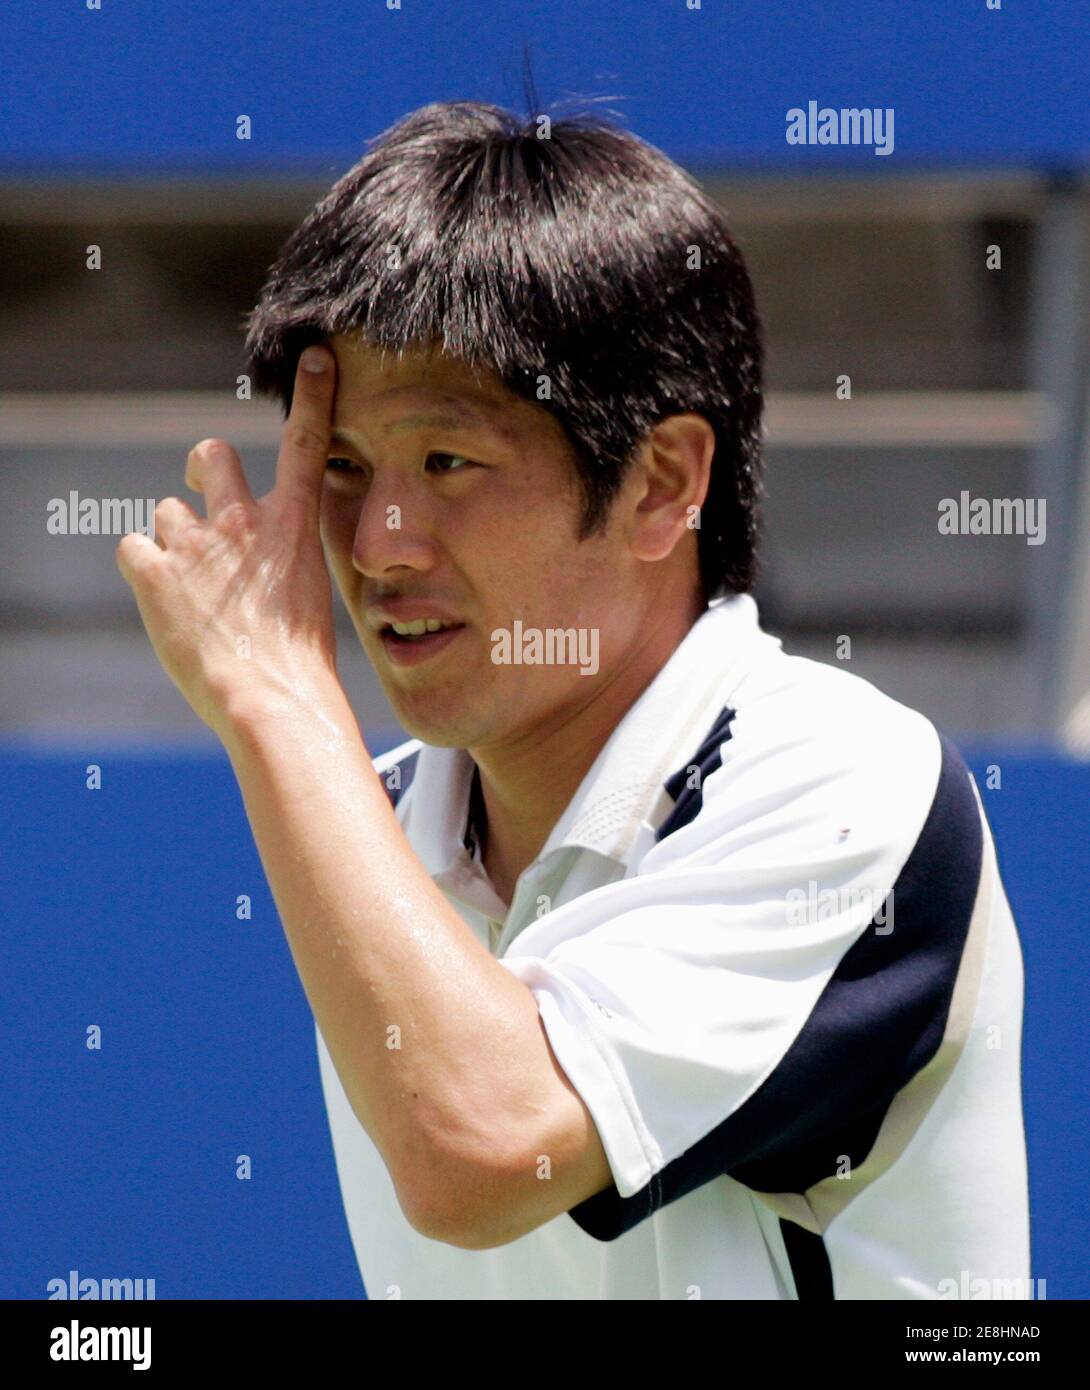 Kevin Kim of the U.S. wipes his forehead during his first round loss to compatriot James Blake at the Sydney International tennis tournament in Sydney January 9, 2007. REUTERS/Will Burgess (AUSTRALIA) Stock Photo